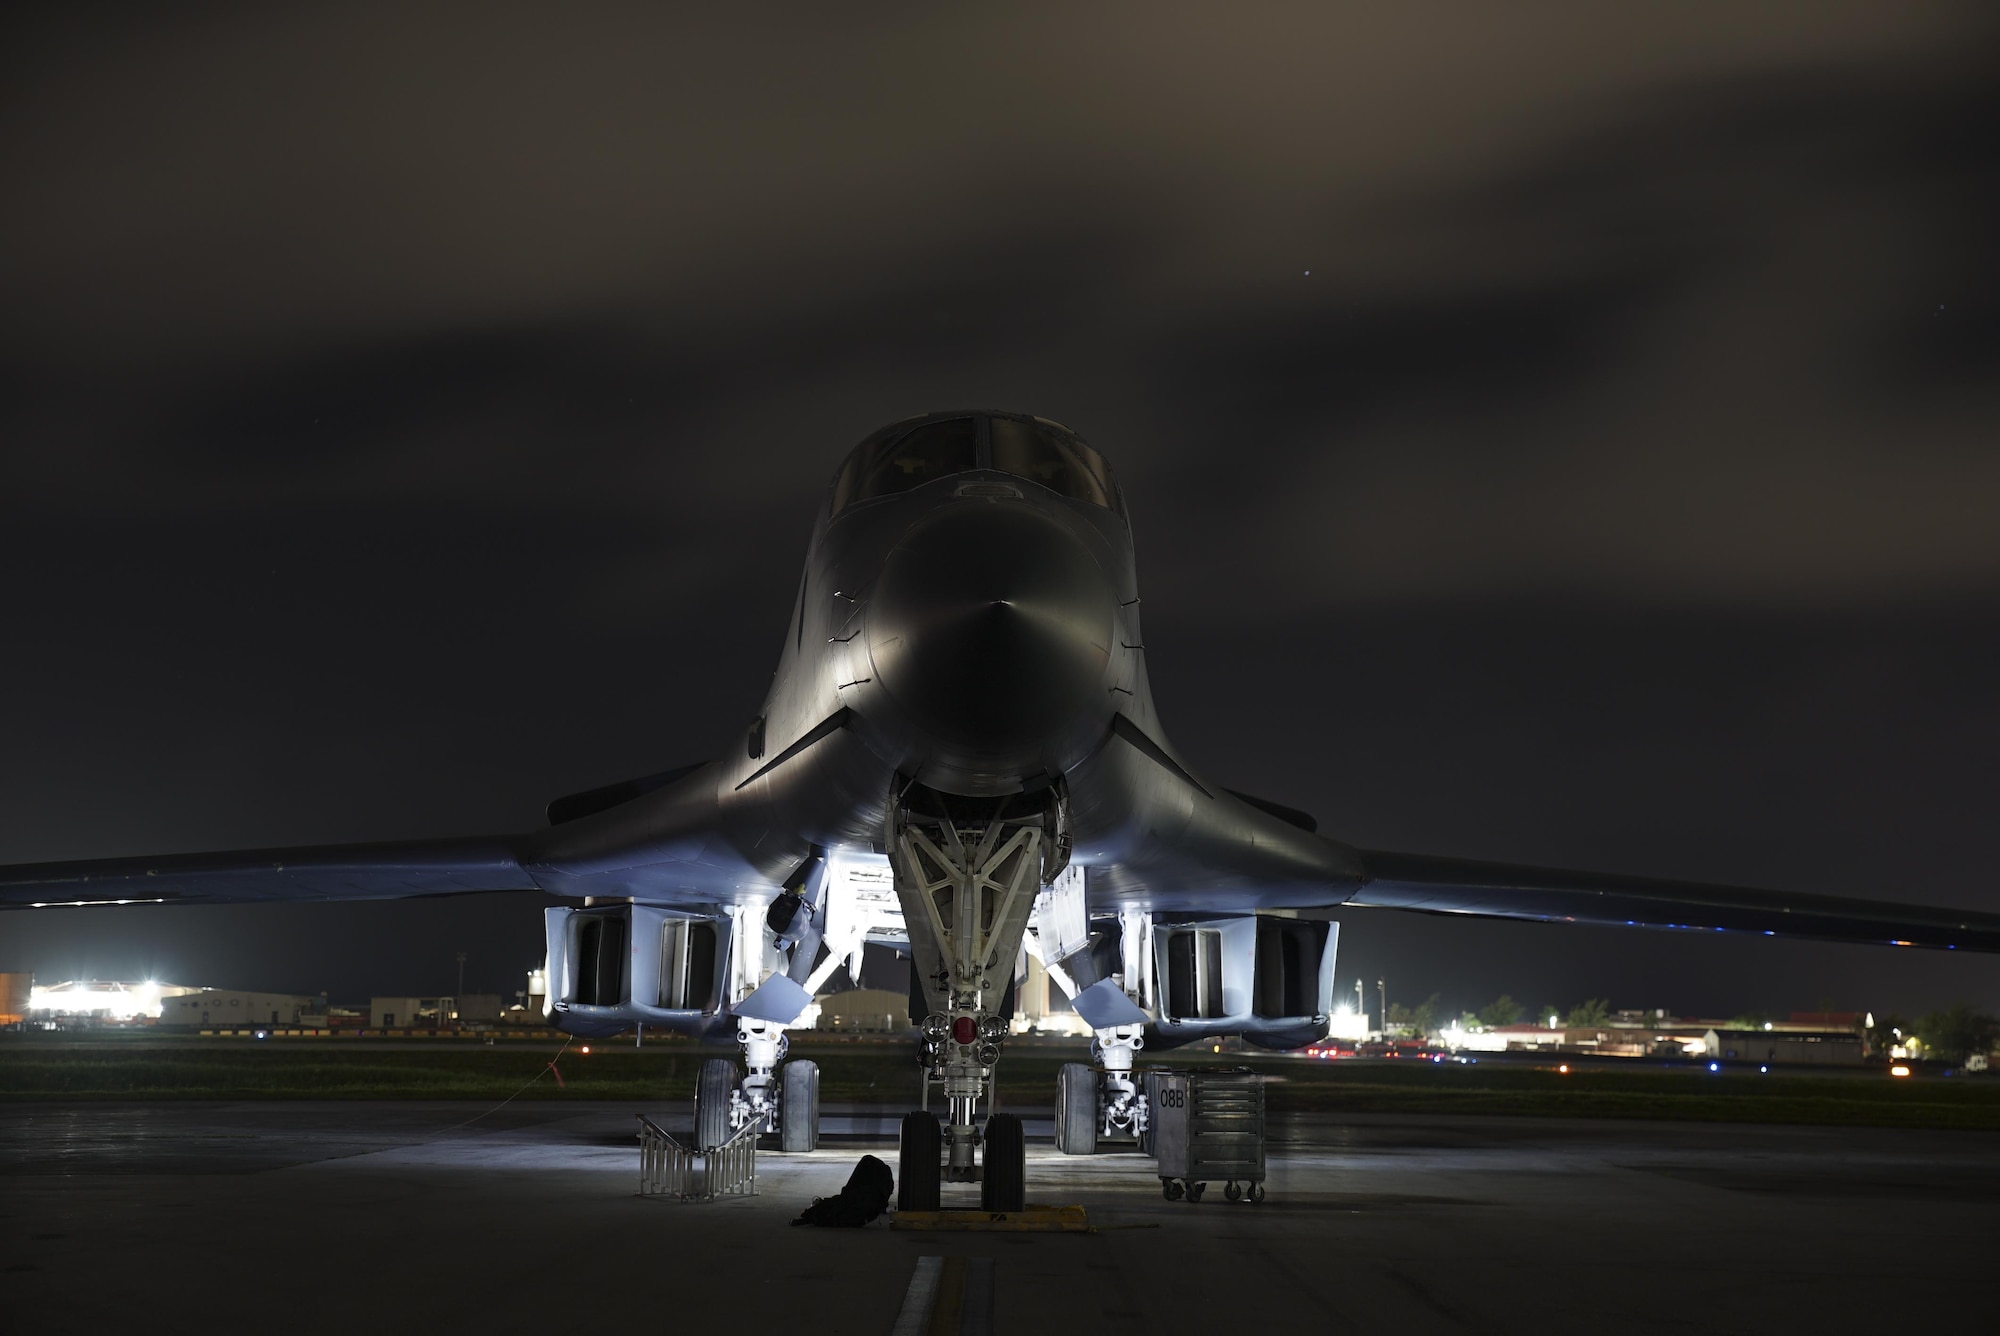 A U.S. Air Force B-1B Lancer aircraft assigned to the 9th Expeditionary Bomb Squadron, deployed from Dyess Air Force Base, Texas, prepares to takeoff from Andersen Air Force Base, Guam, July 20, 2017. The lancers conducted bilateral training mission with Royal Australian Air Force Joint Terminal Attack Controllers (JTACs), July 20 as part of Talisman Saber 17 a training exercise designed to maximize combined training opportunities and conduct maritime preposition and logistics operations in the Pacific. (U.S. Air Force photo/Tech. Sgt. Richard P. Ebensberger)